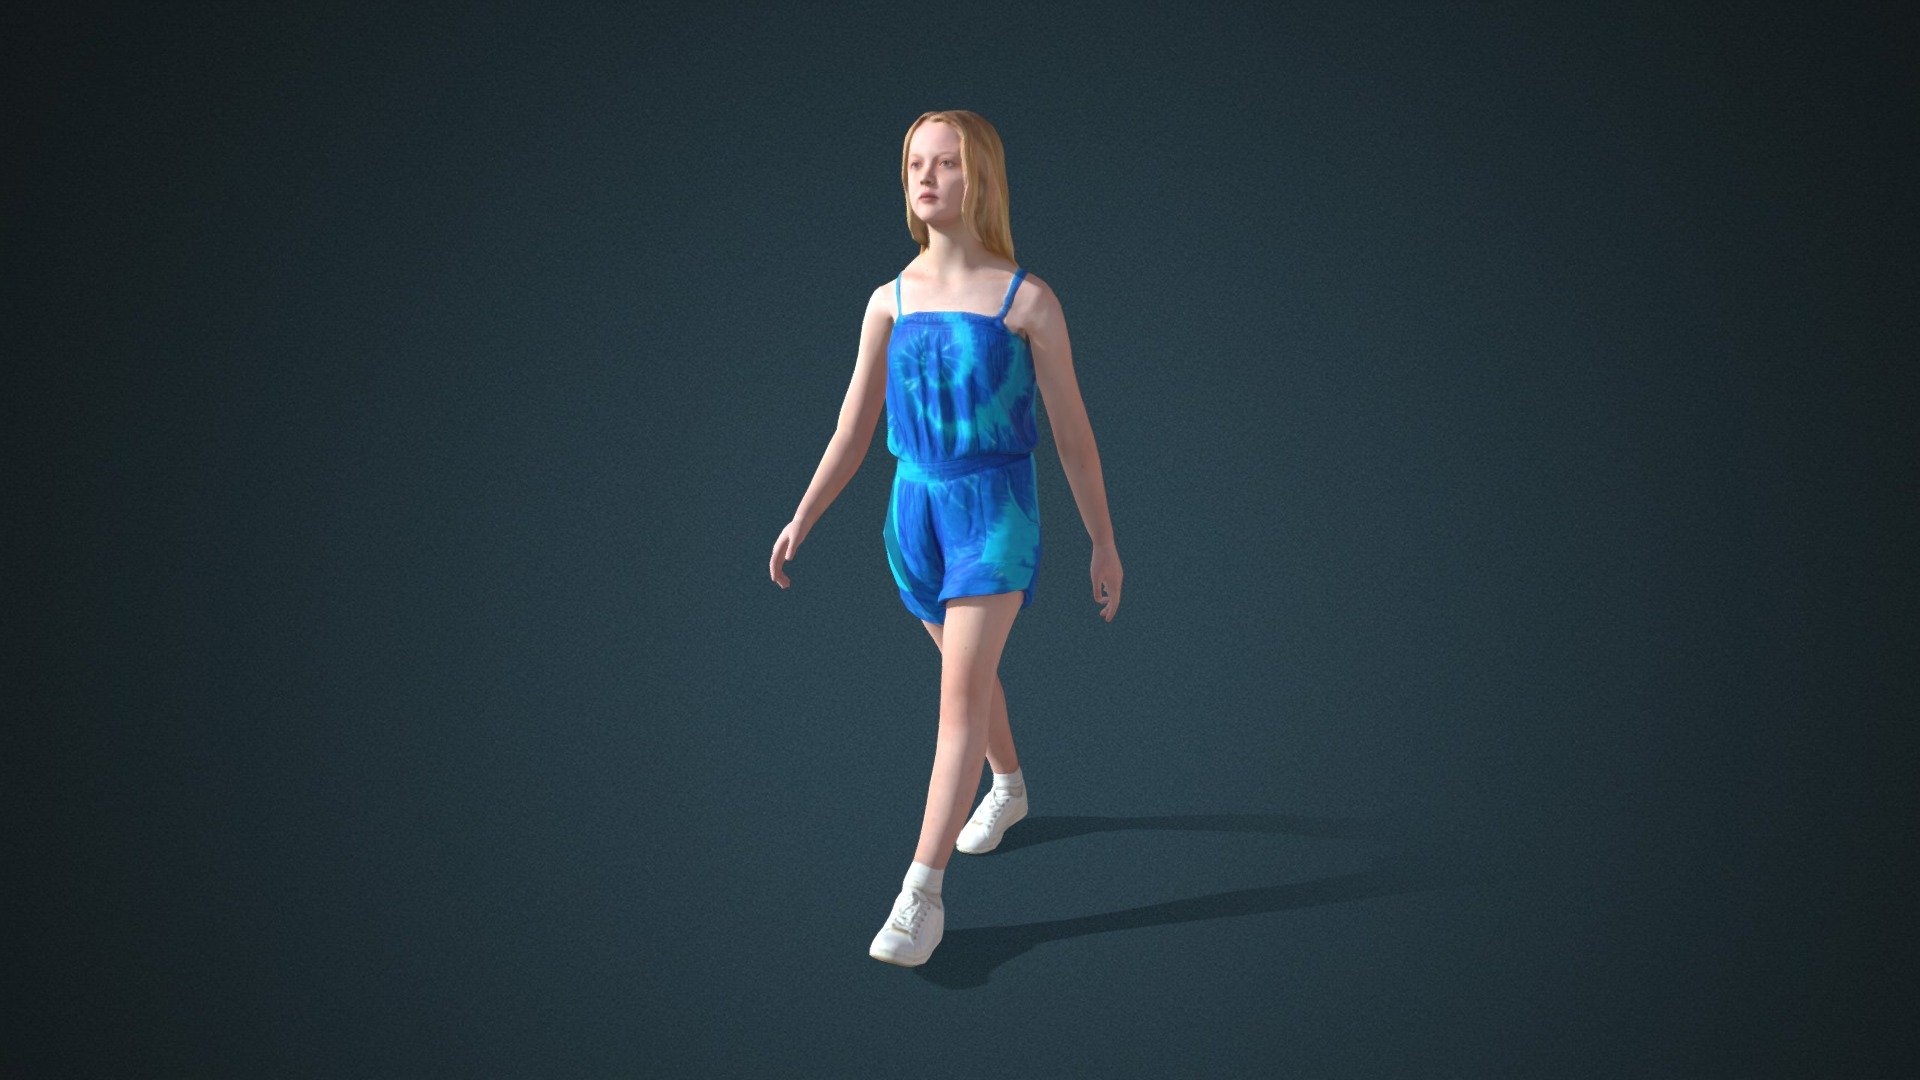 Do you like this model?  Free Download more models, motions and auto rigging tool AccuRIG (Value: $150+) on ActorCore
 

This model includes 2 mocap animations: Modern_F_Idle,Modern_F_Walk
Design for high-performance crowd animation.

Buy full pack and Save 20%+: Teens Vol.2


SPECIFICATIONS

✔ Geometry : 7K~10K Quads, one mesh

✔ Material : One material with changeable colors.

✔ Texture Resolution : 4K

✔ Shader : PBR, Diffuse, Normal, Roughness, Metallic, Opacity

✔ Rigged : Facial and Body (shoulders, fingers, toes, eyeballs, jaw)

✔ Blendshape : 122 for facial expressions and lipsync

✔ Compatible with iClone AccuLips, Facial ExPlus, and traditional lip-sync.


About Reallusion ActorCore

ActorCore offers the highest quality 3D asset libraries for mocap motions and animated 3D humans for crowd rendering 3d model